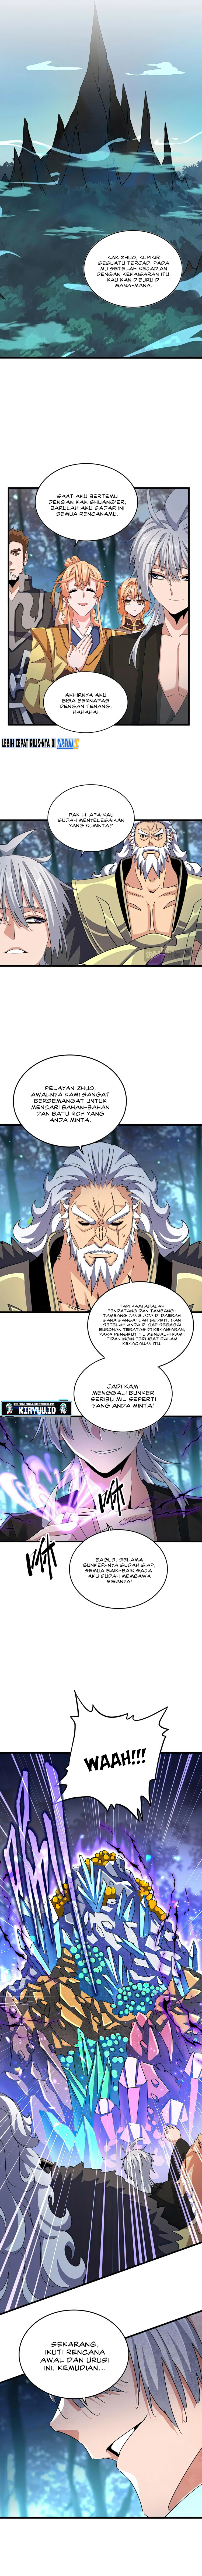 Magic Emperor Chapter 445 Image 6